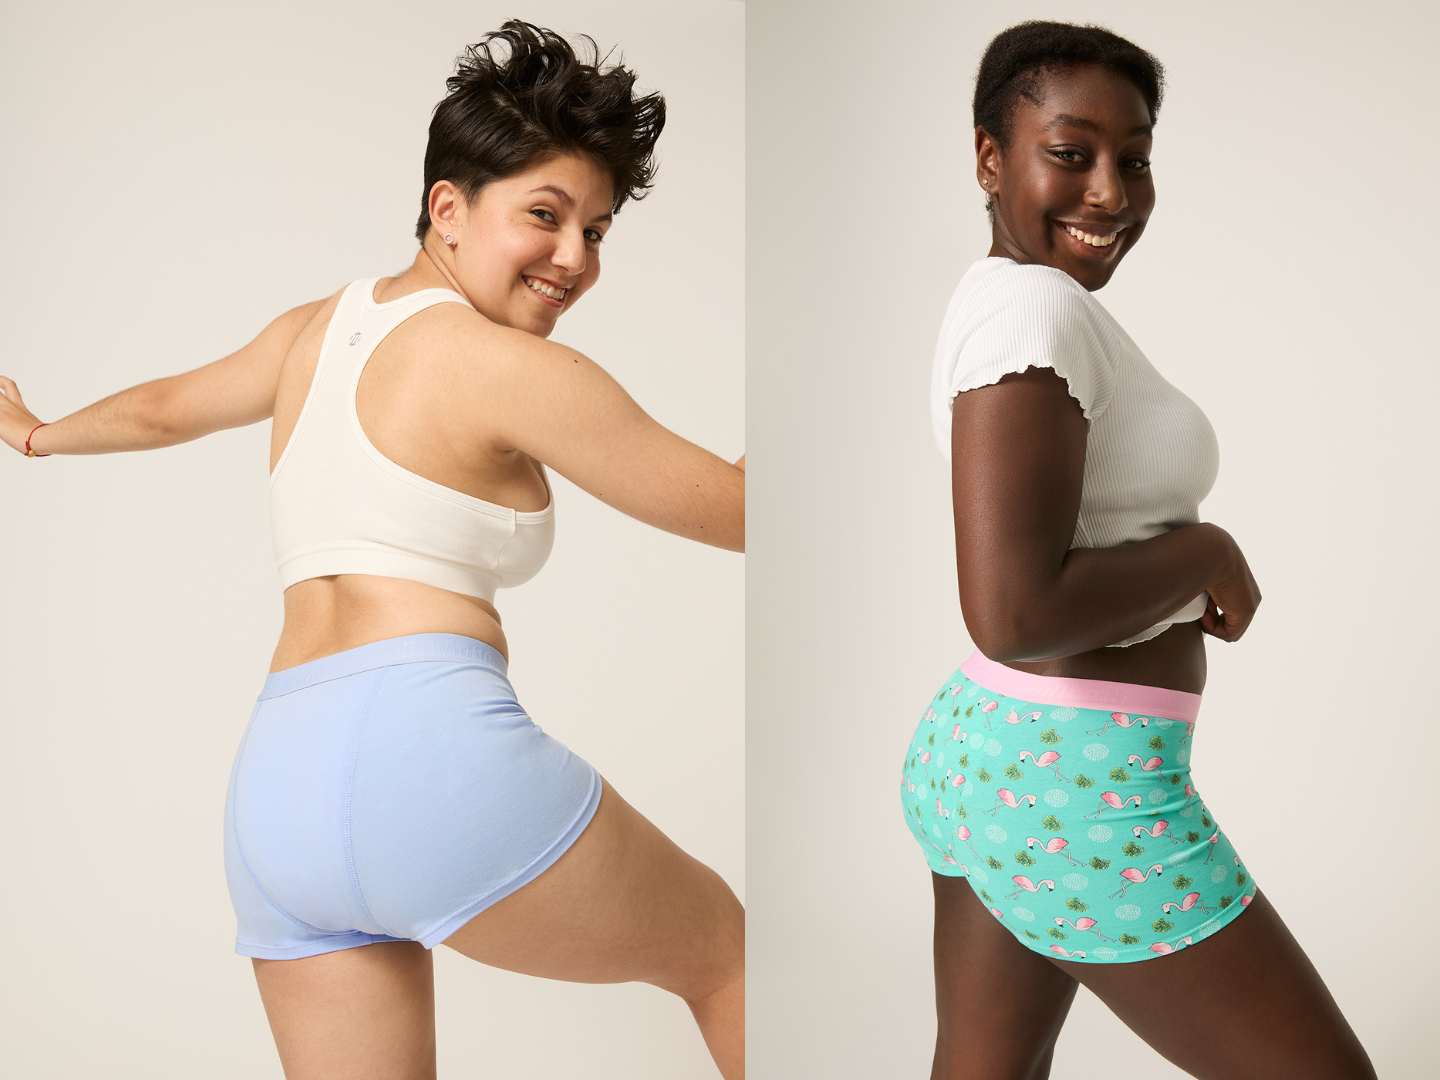 Underwear for all: How Modibodi, Bonds are catering to queer